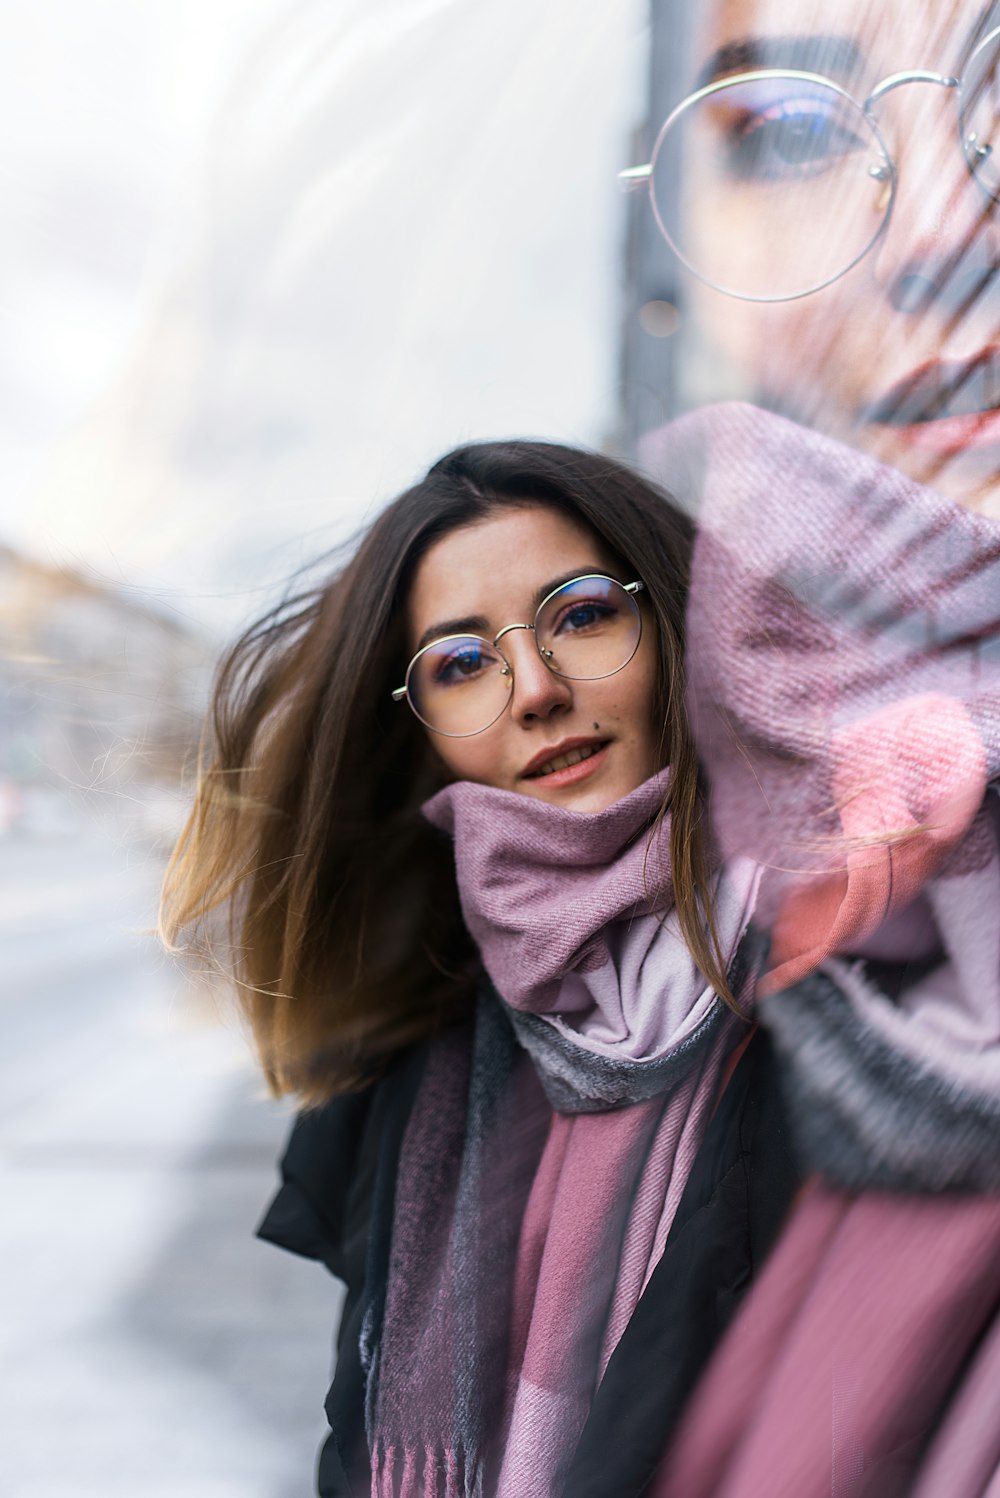 woman in black framed eyeglasses and gray scarf